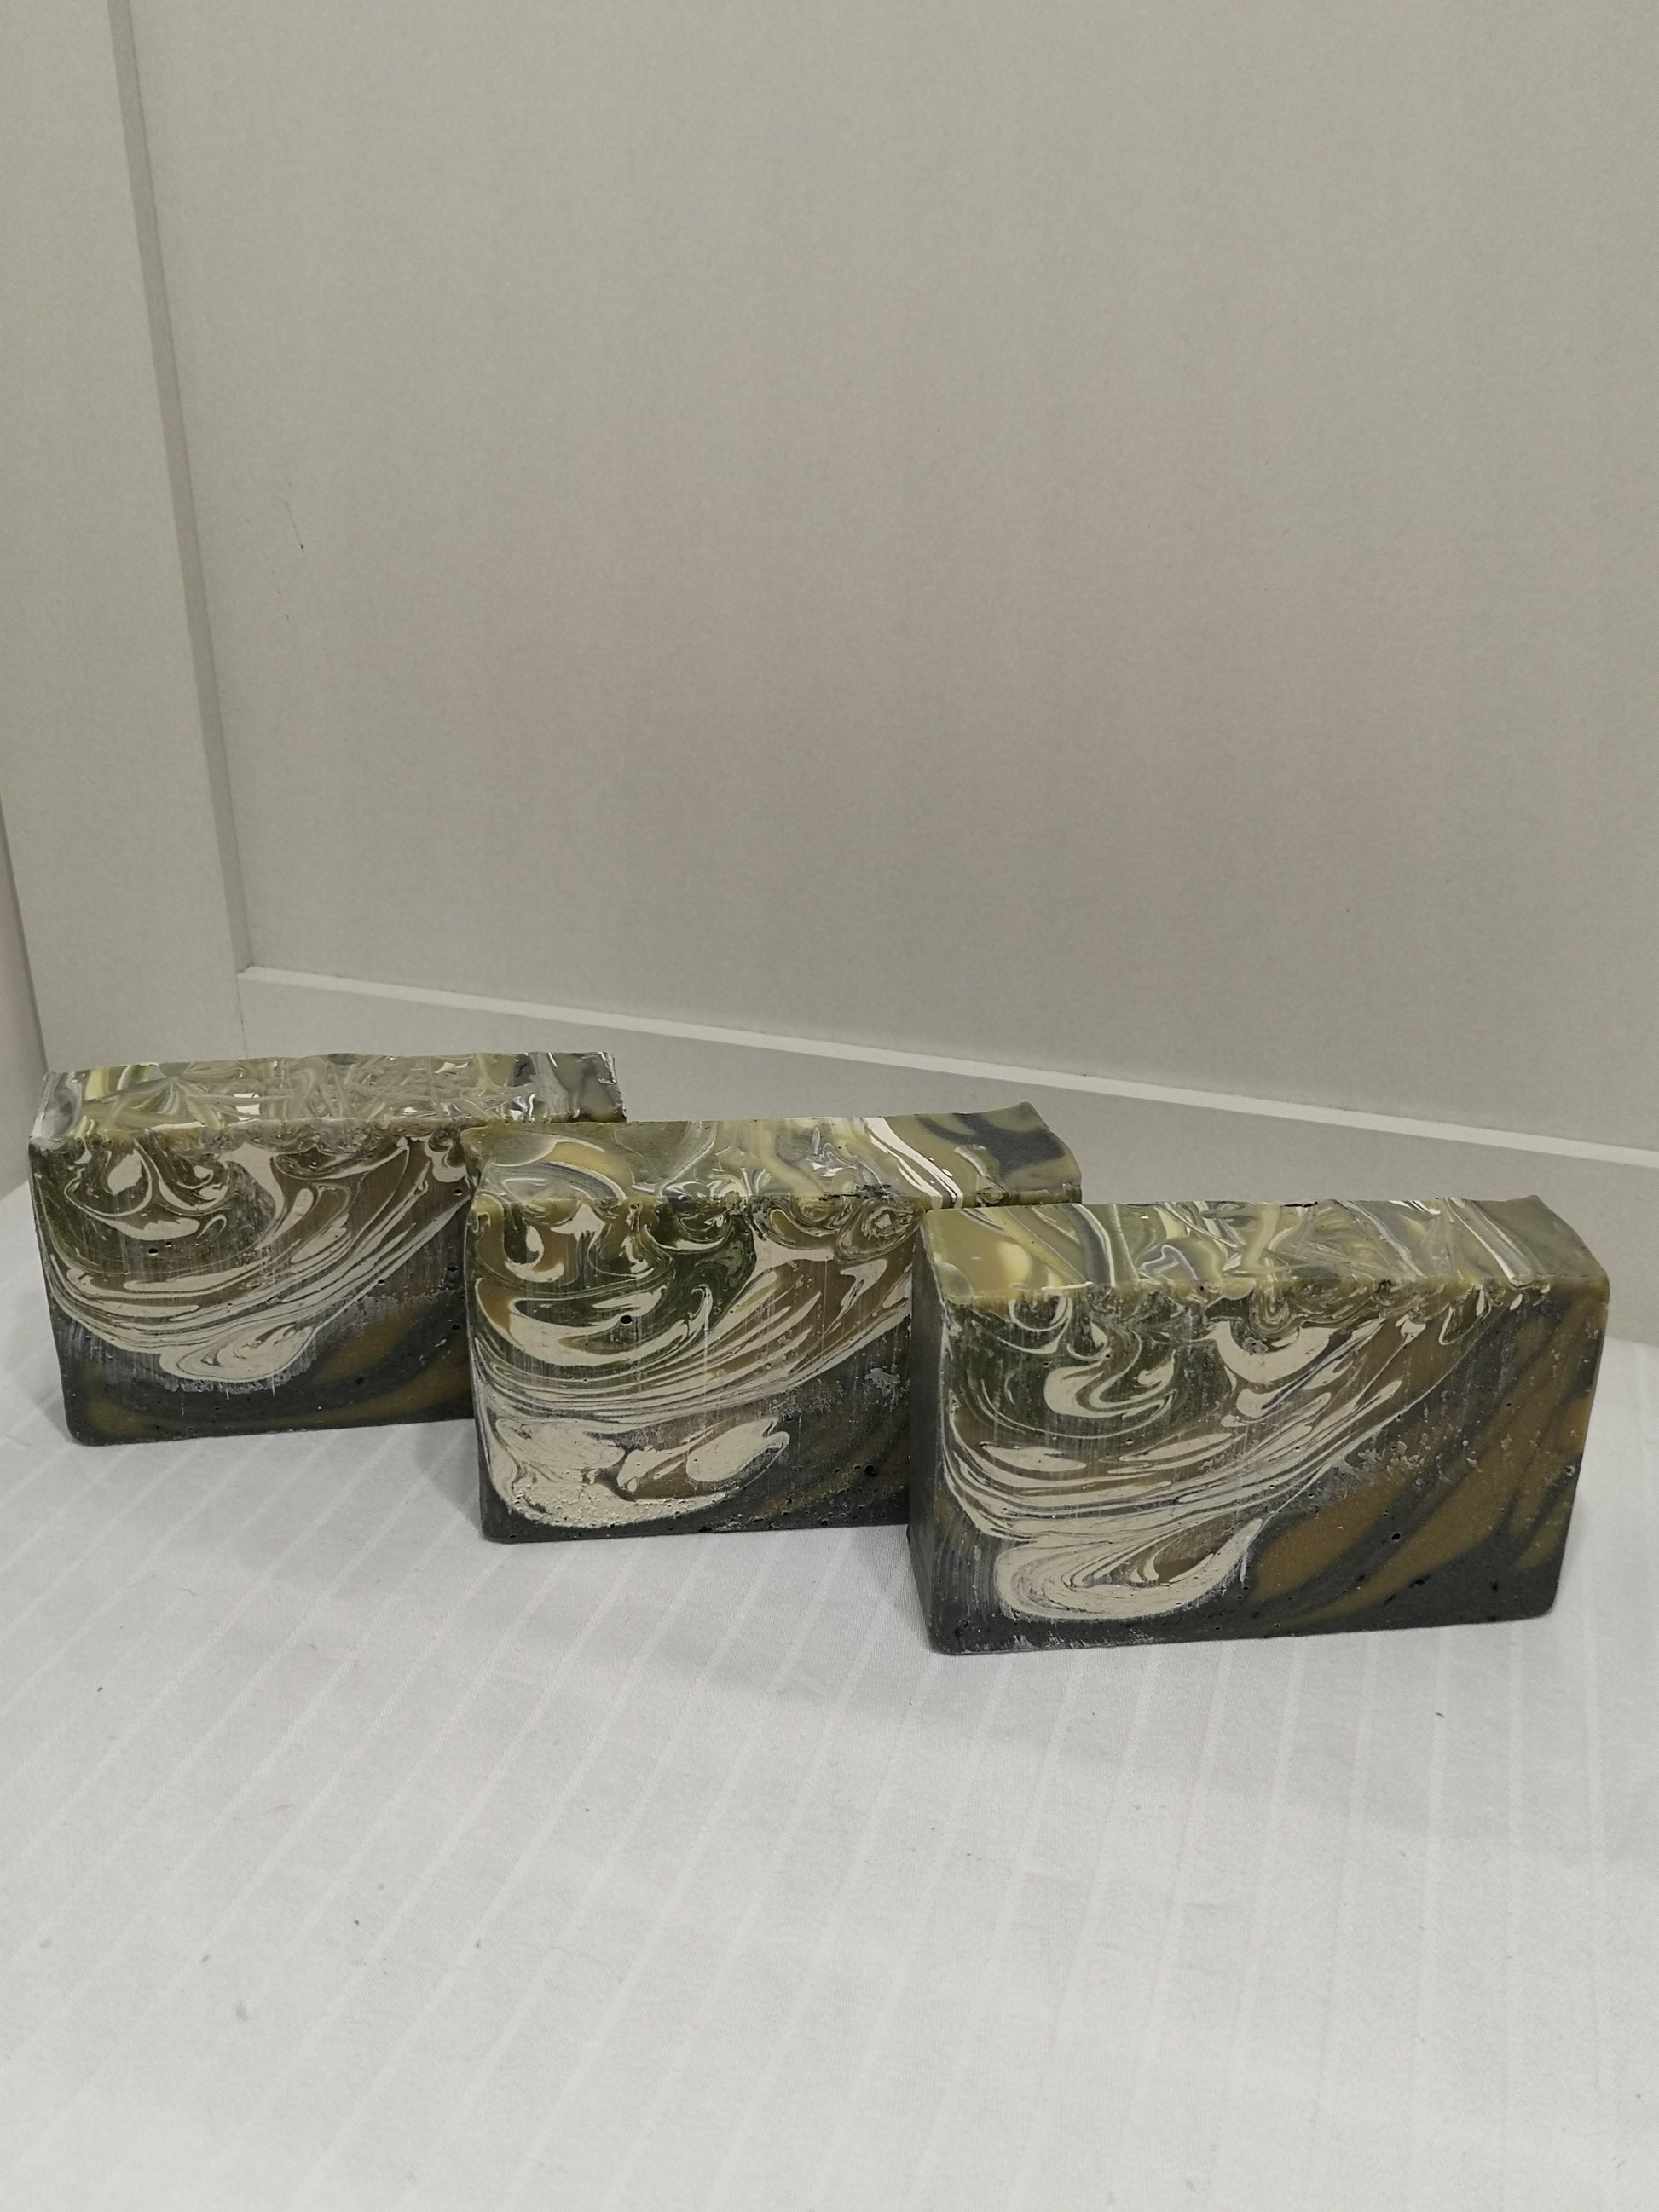 Three bars of soap on an off-white background. Black, brown and cream swirl.